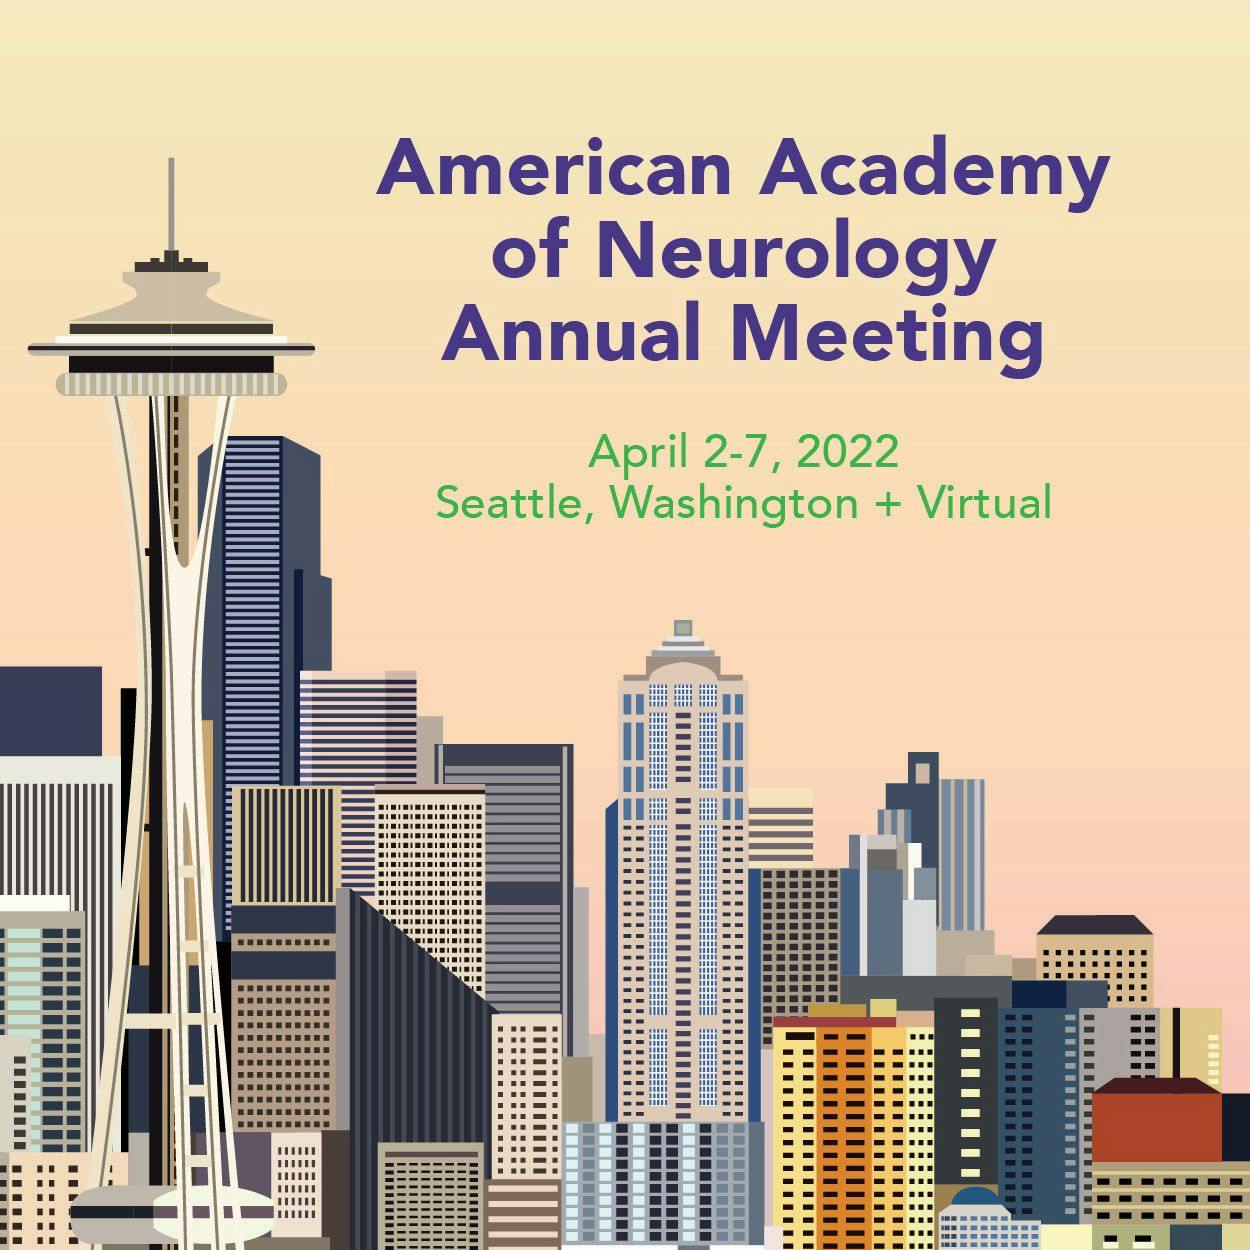 What to Expect From the 2022 American Academy of Neurology Annual Meeting